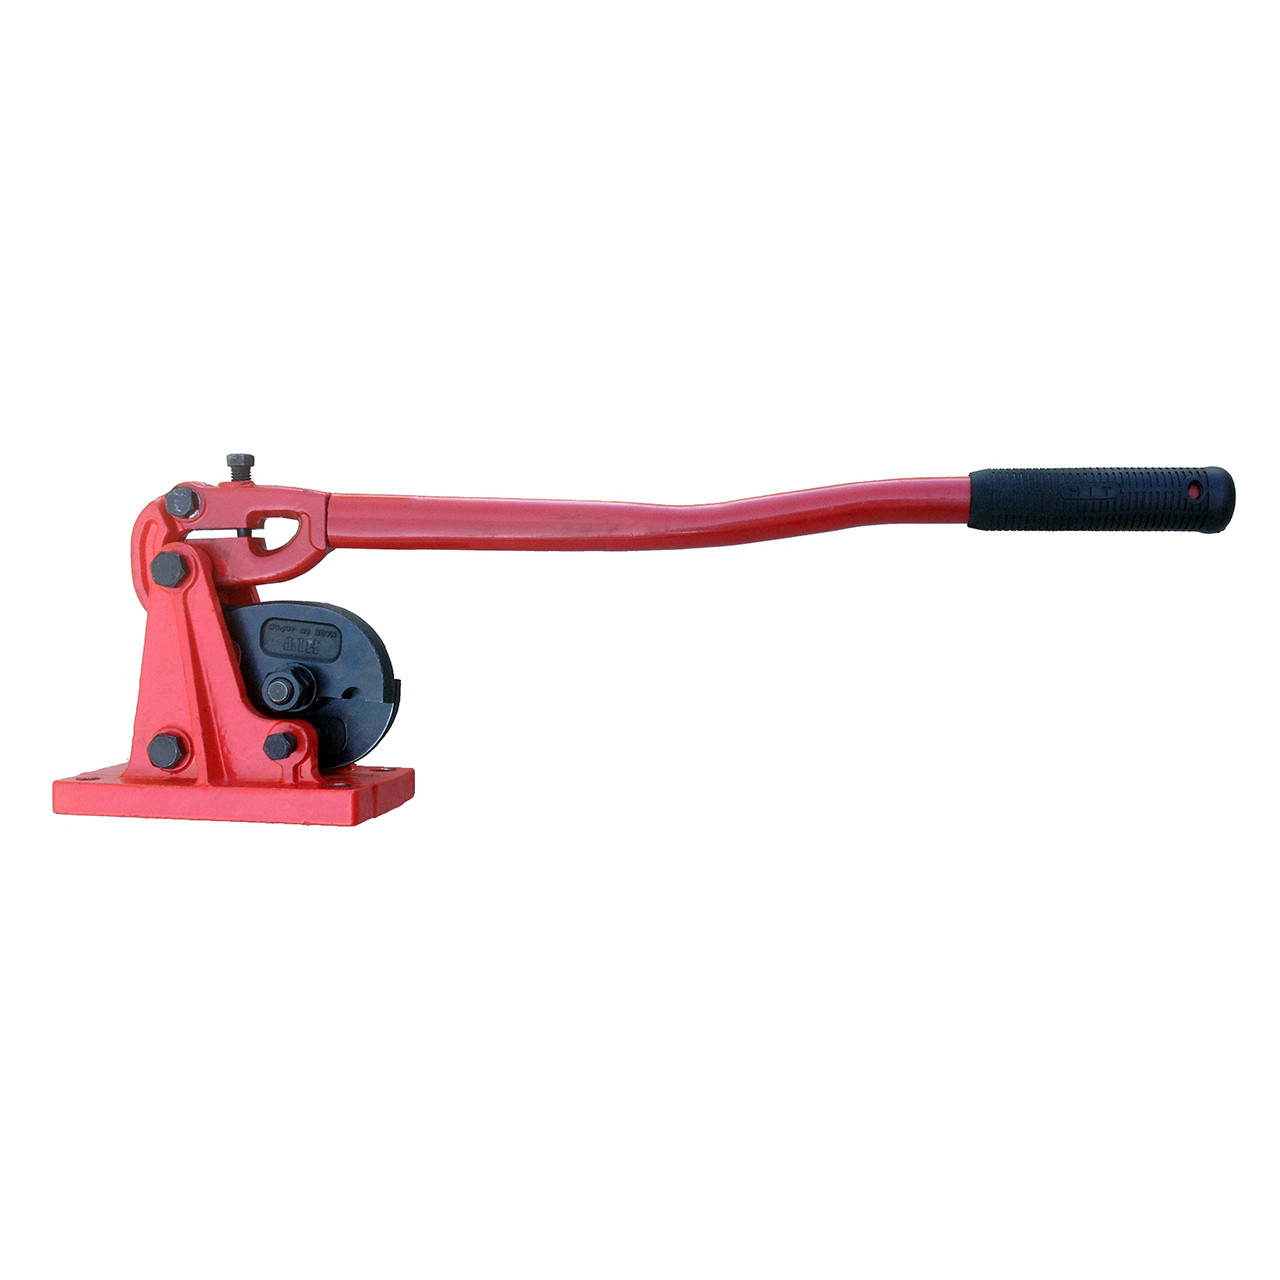 Large Diameter Wire Rope Cutter by U.S. Rigging